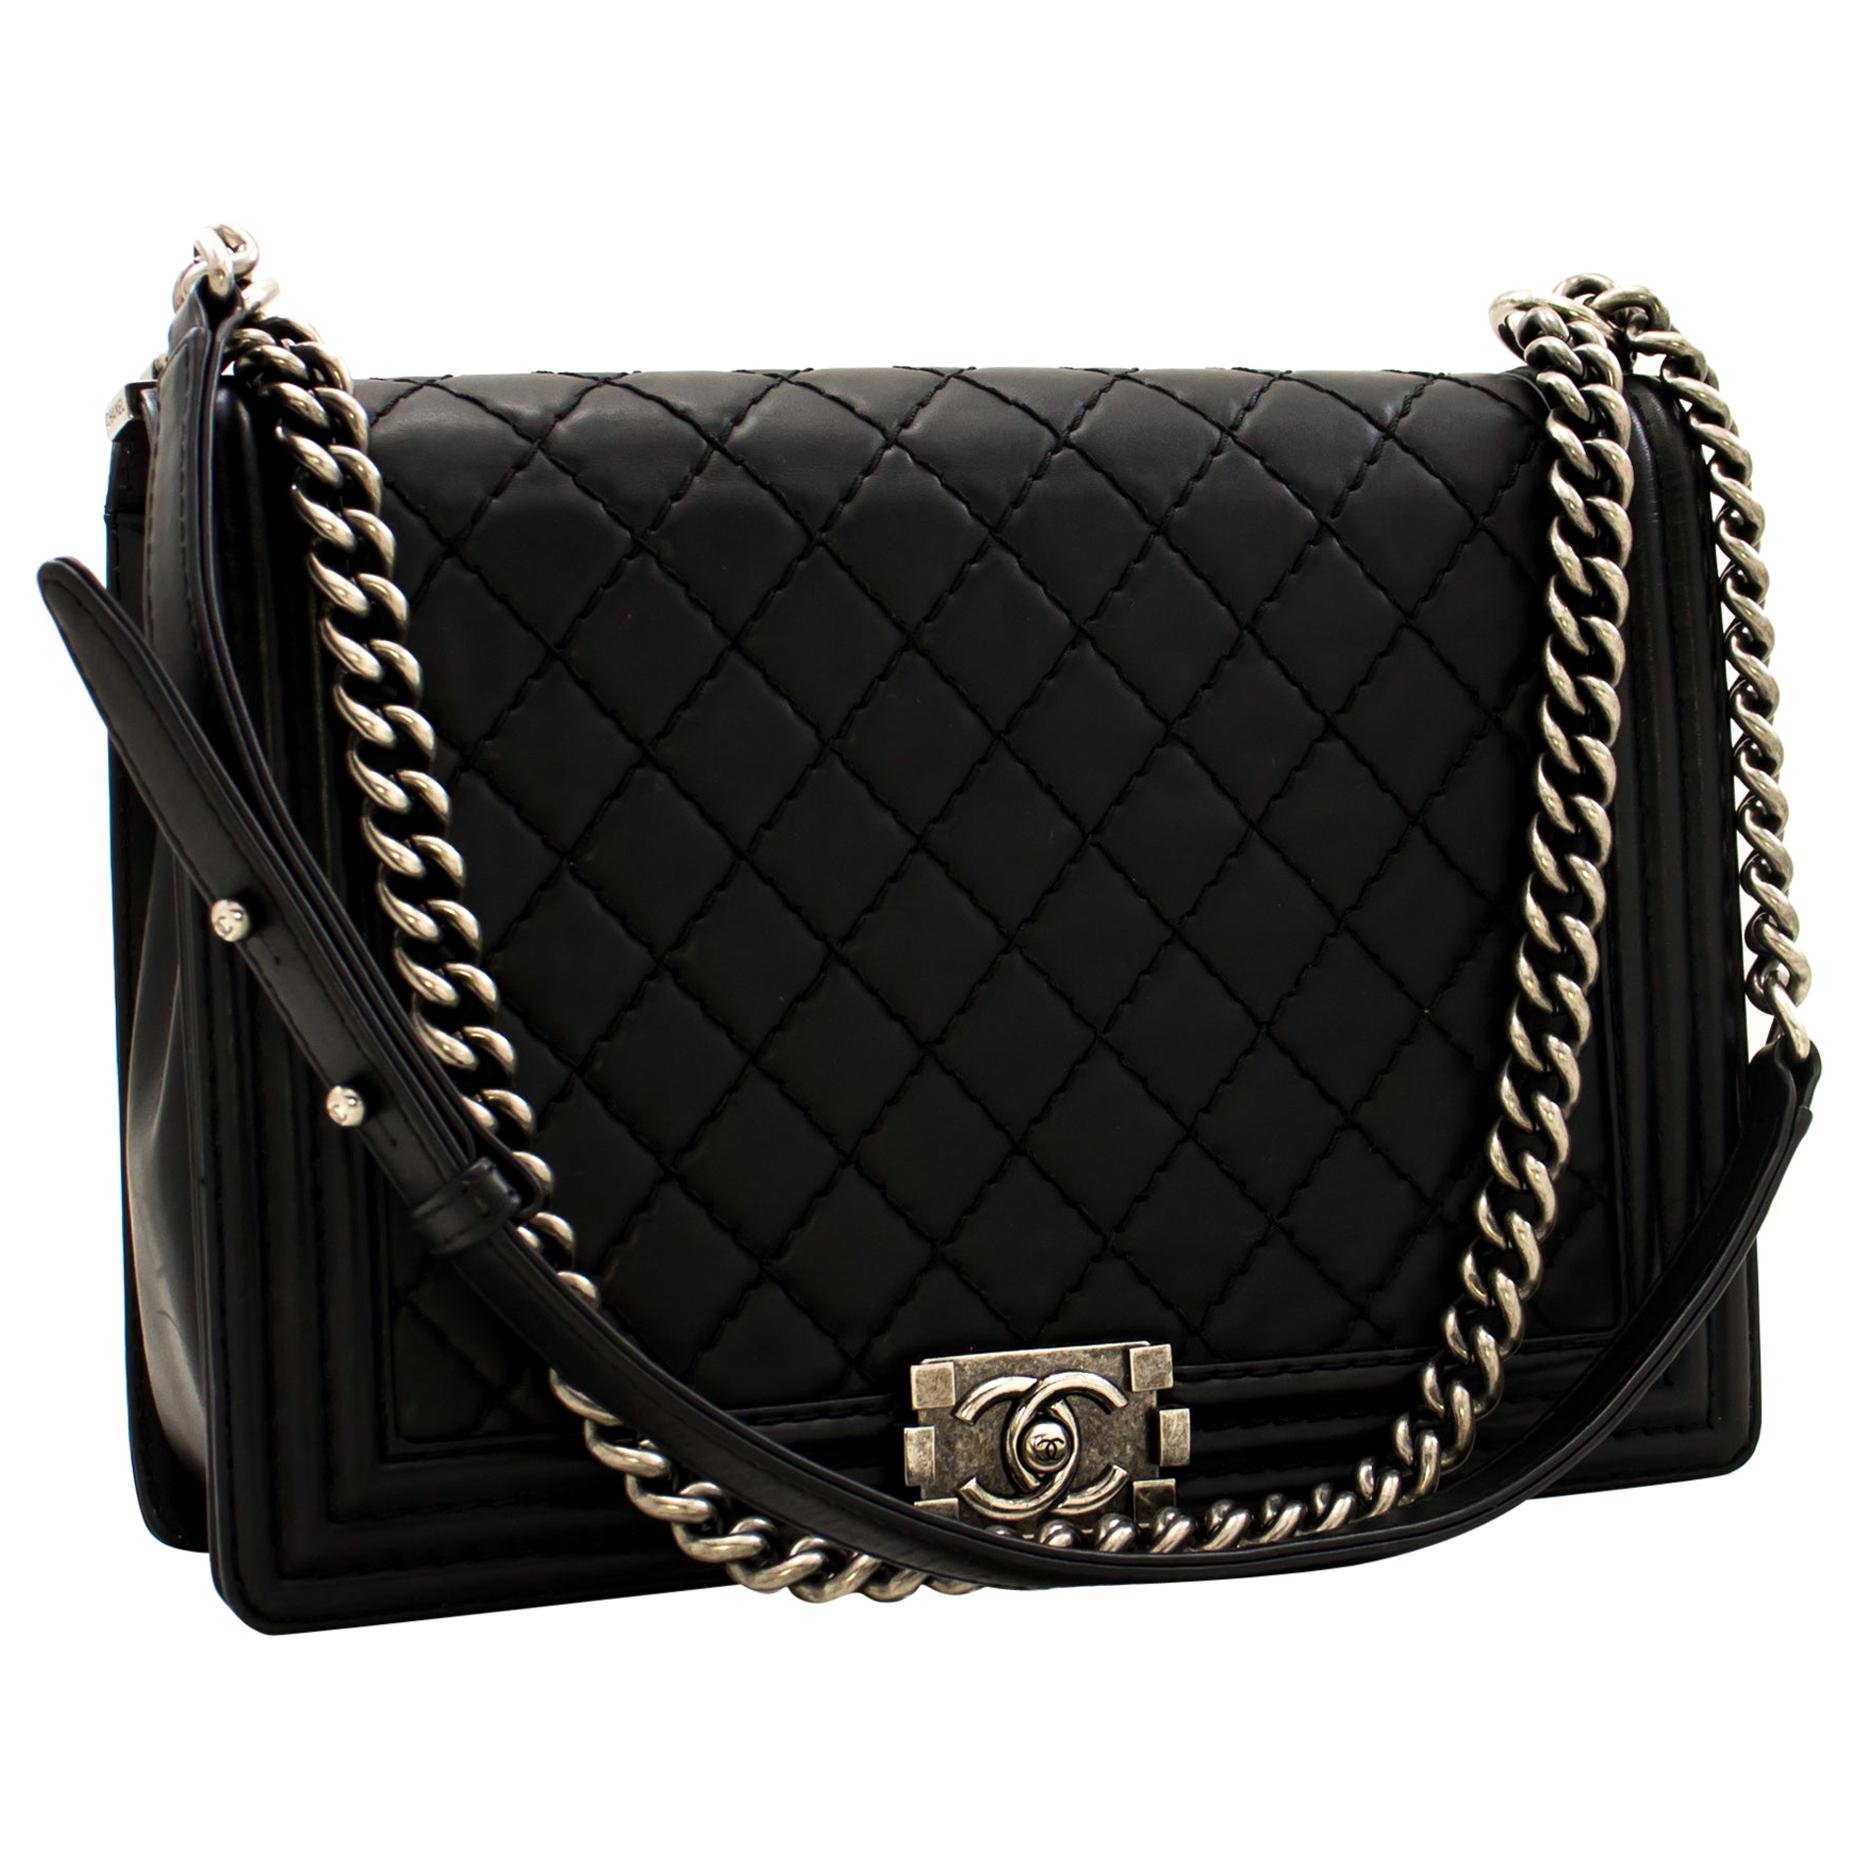 CHANEL Boy Chain Shoulder Bag Black Flap Quilted Leather Crossbody